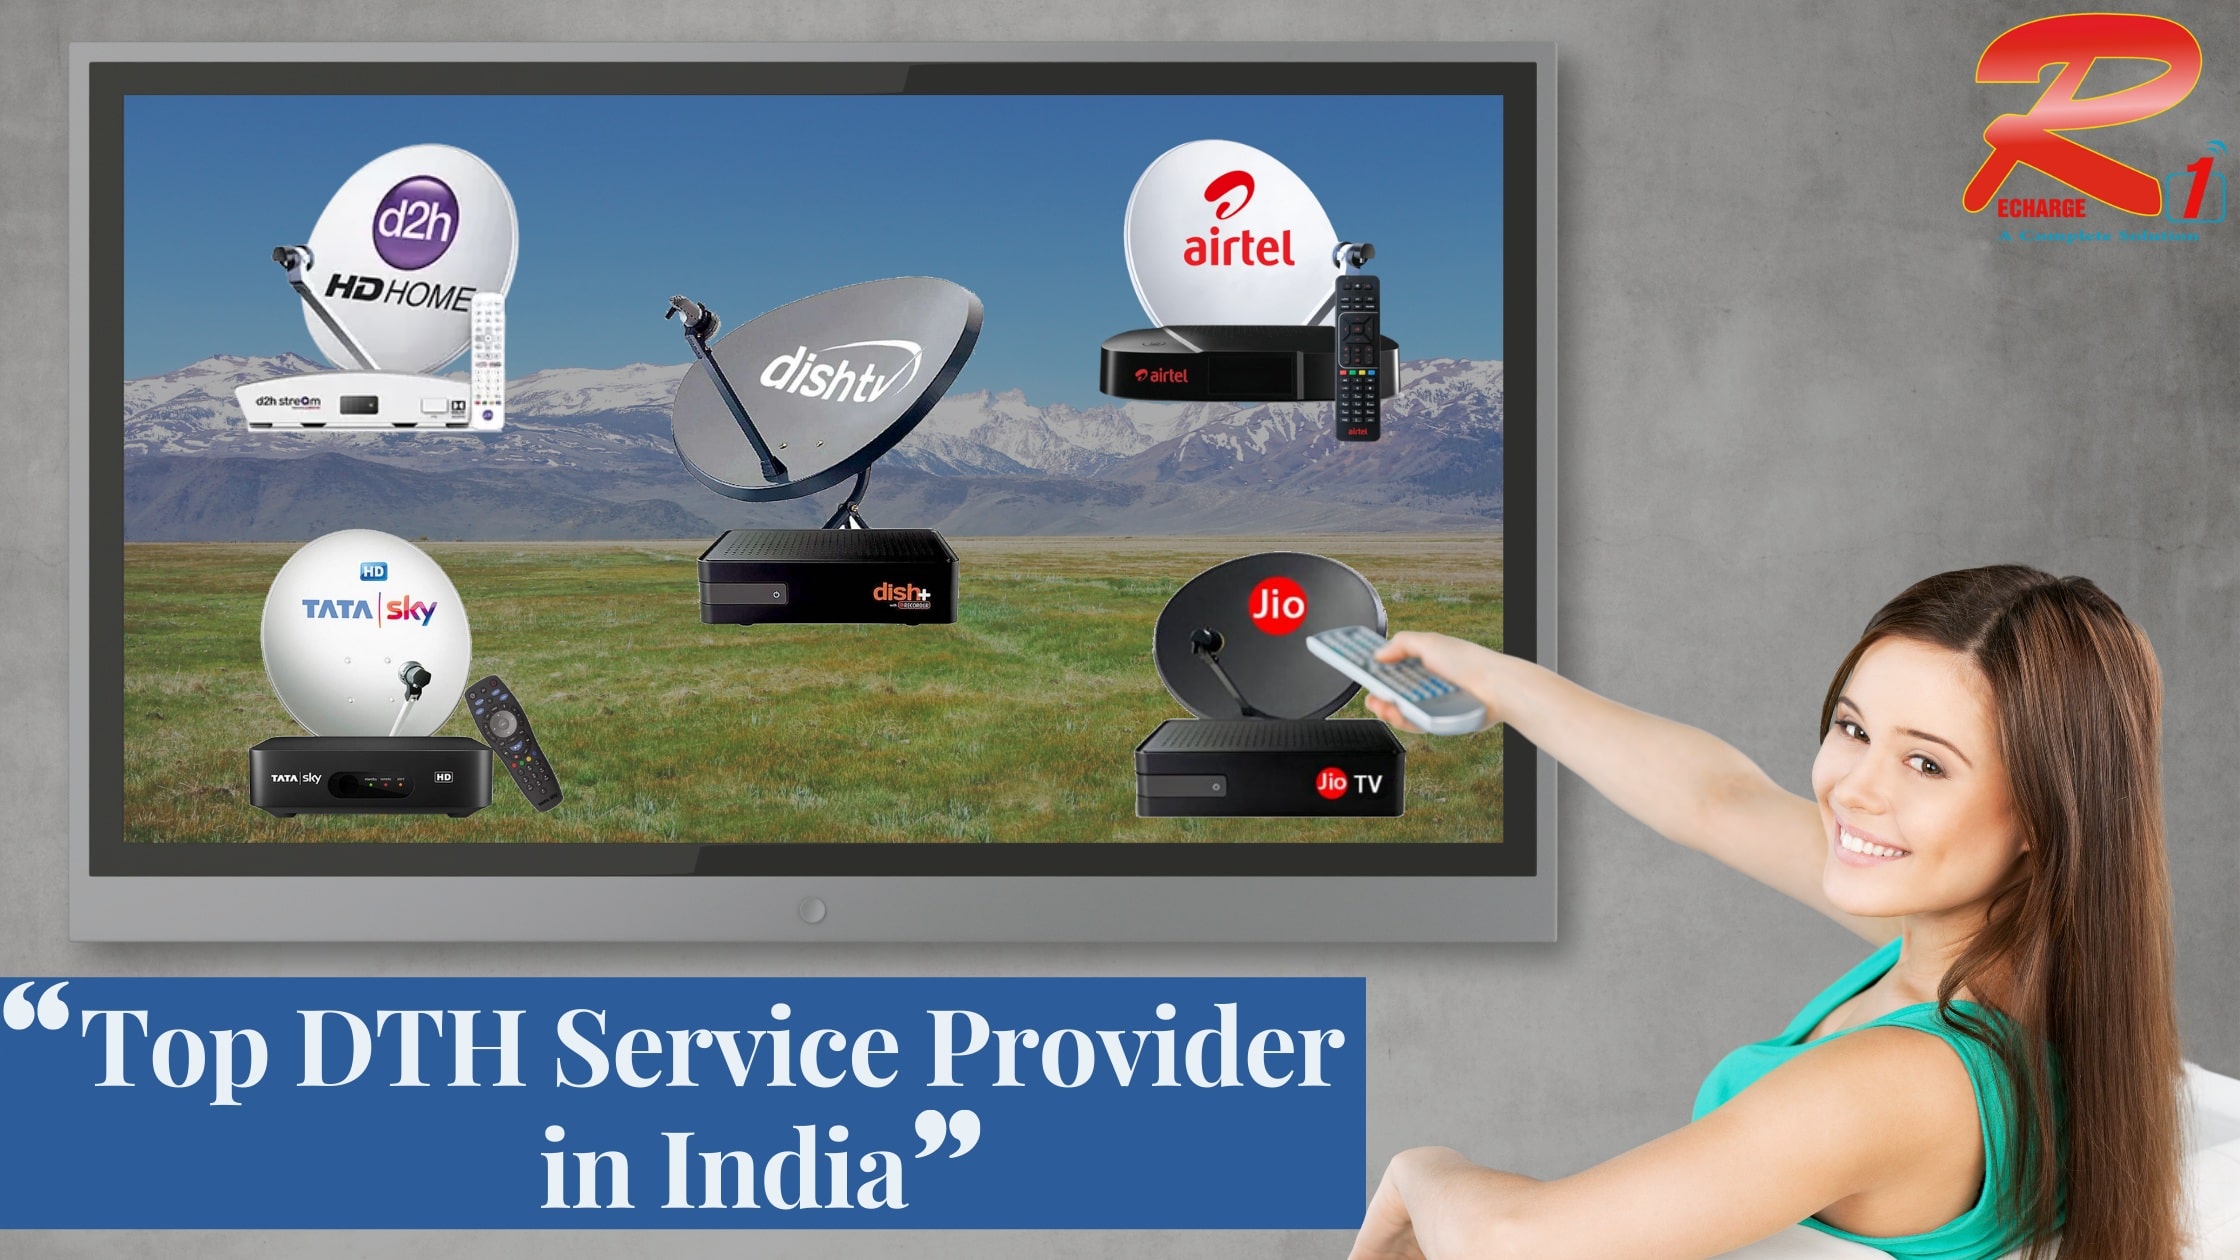  5 Top DTH Service Providers in India